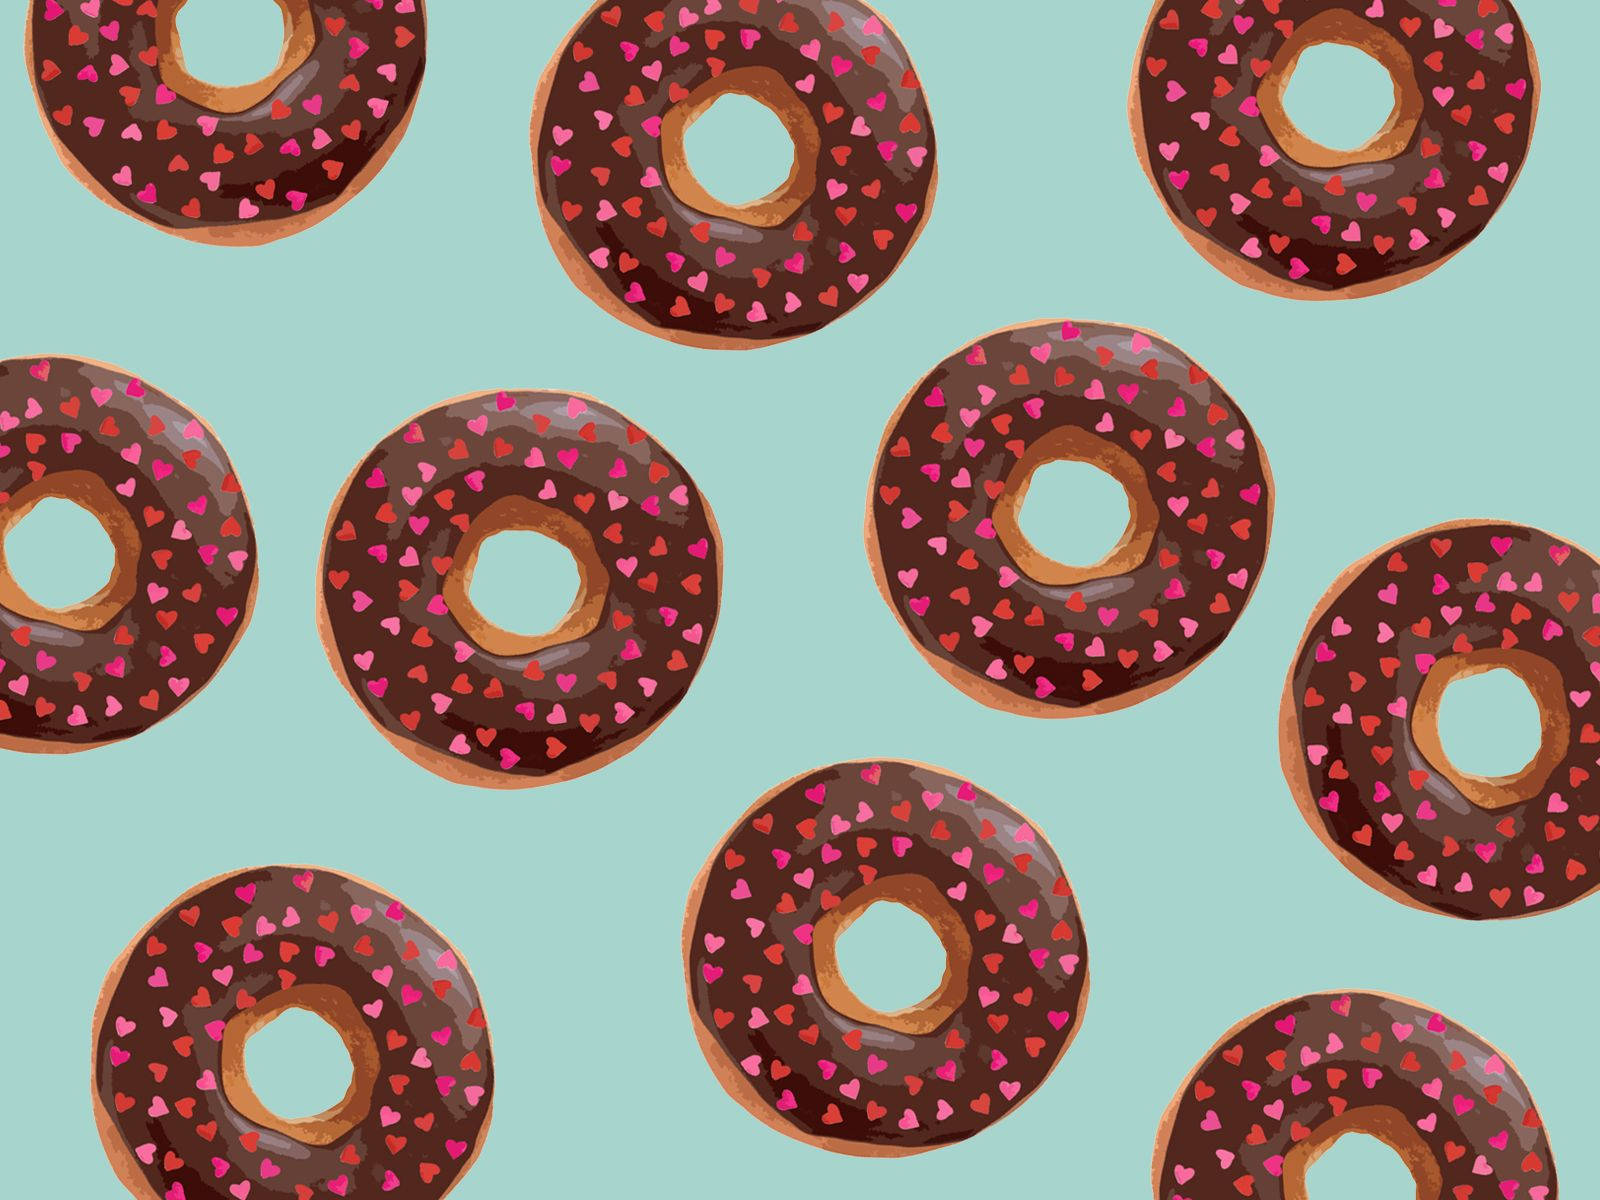 Donuts With Heart Sprinkles For February Wallpaper